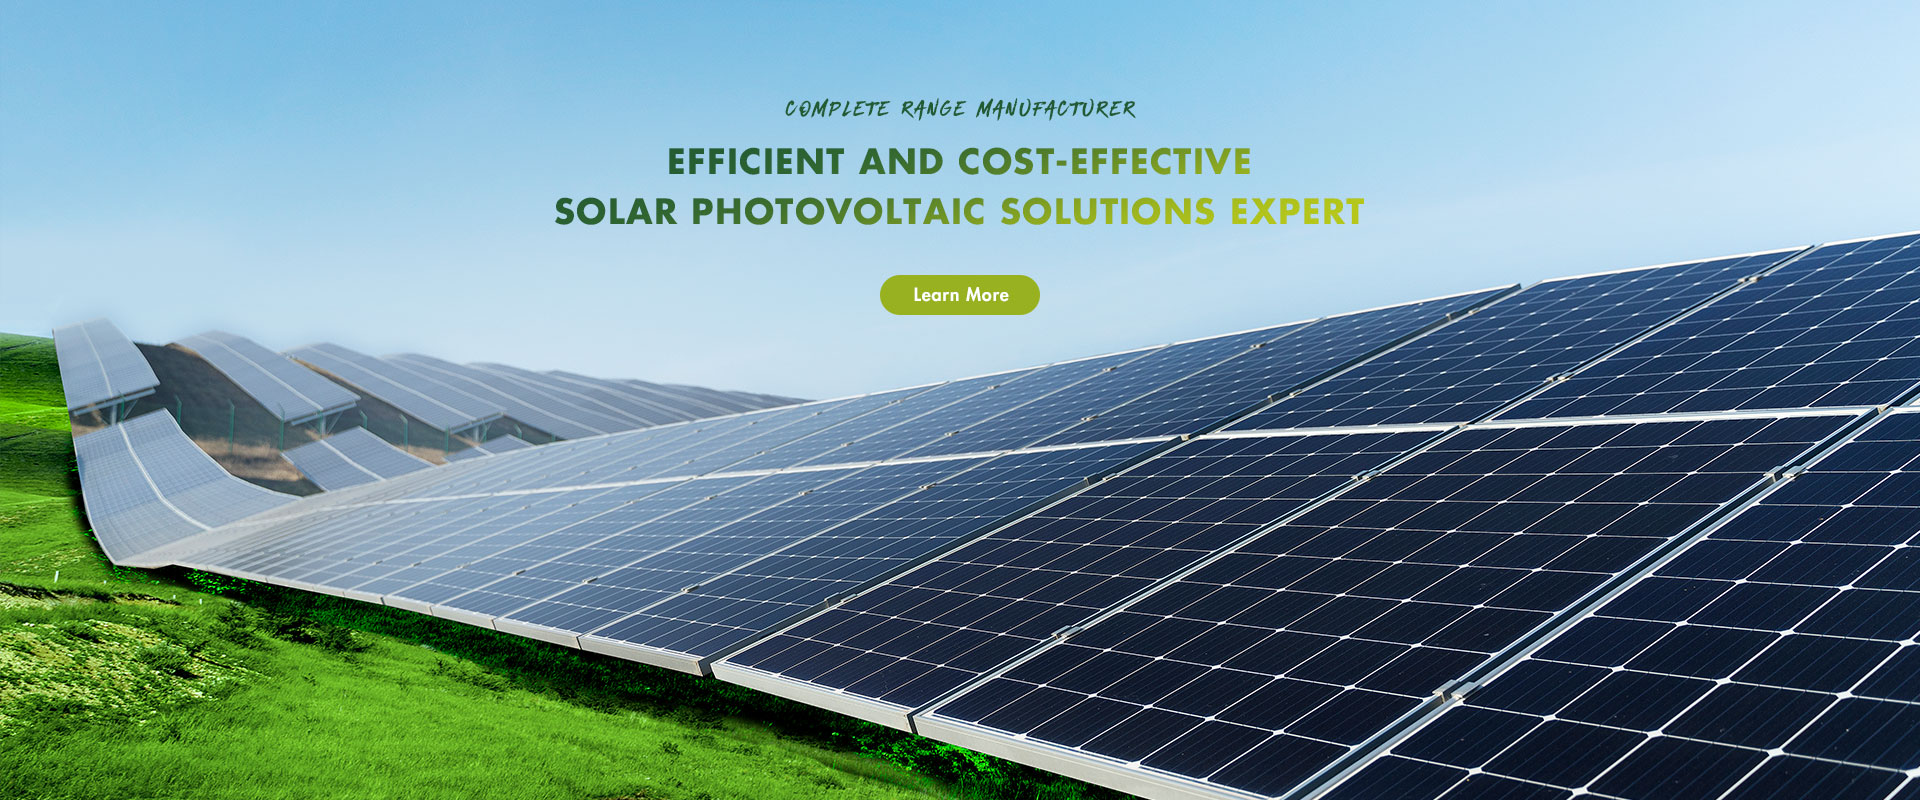 solar photovoltaic solutions expert